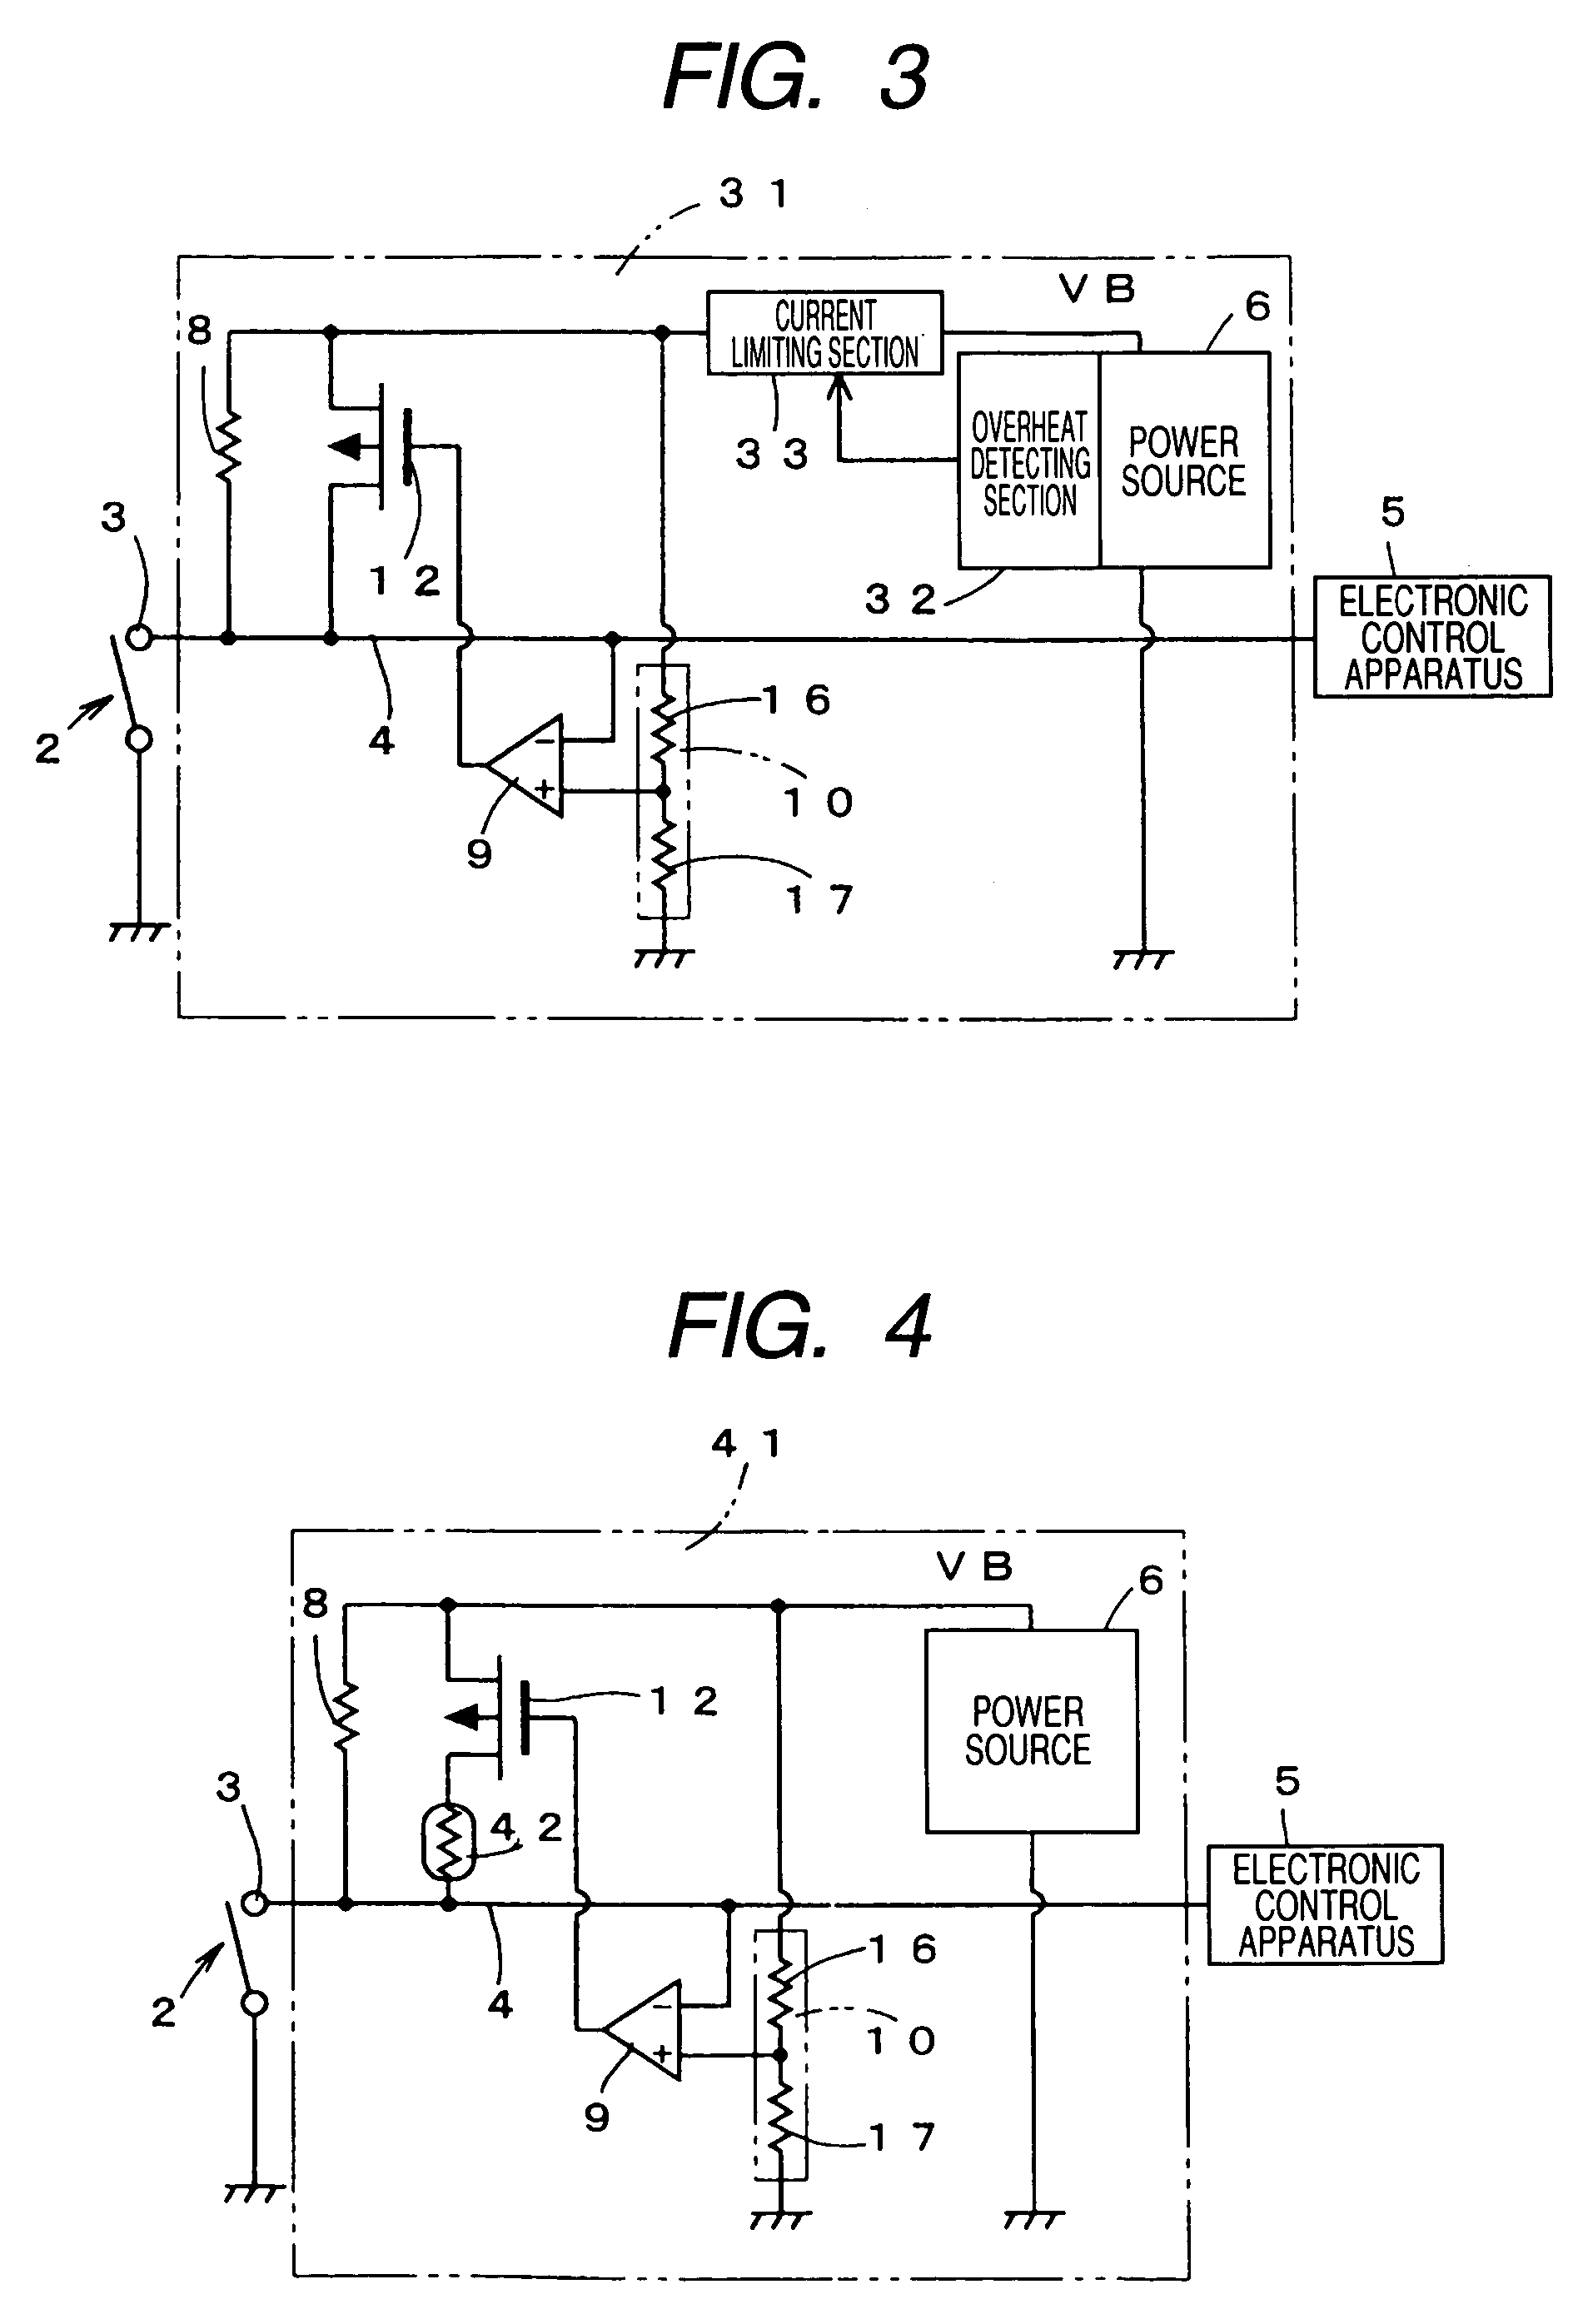 Apparatus for preventing corrosion of contact